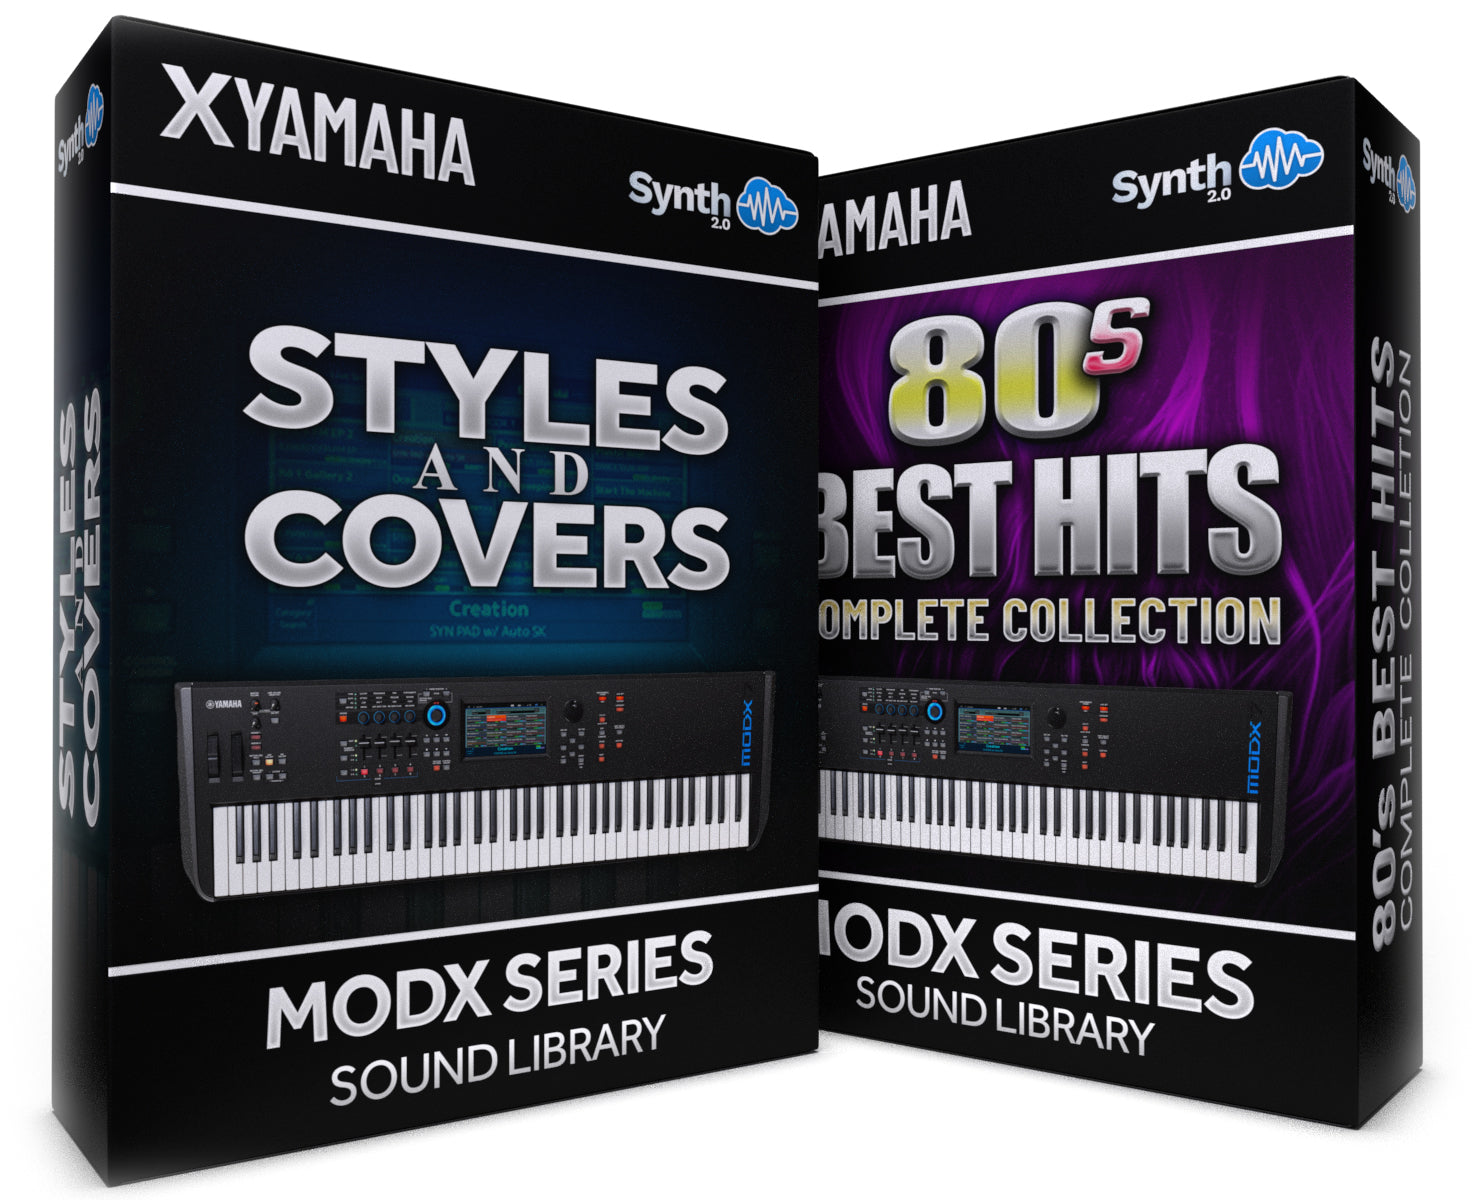 SCL151 - ( Bundle ) - Styles and Covers + 80's Best Hits Complete Collection - Yamaha MODX / MODX+